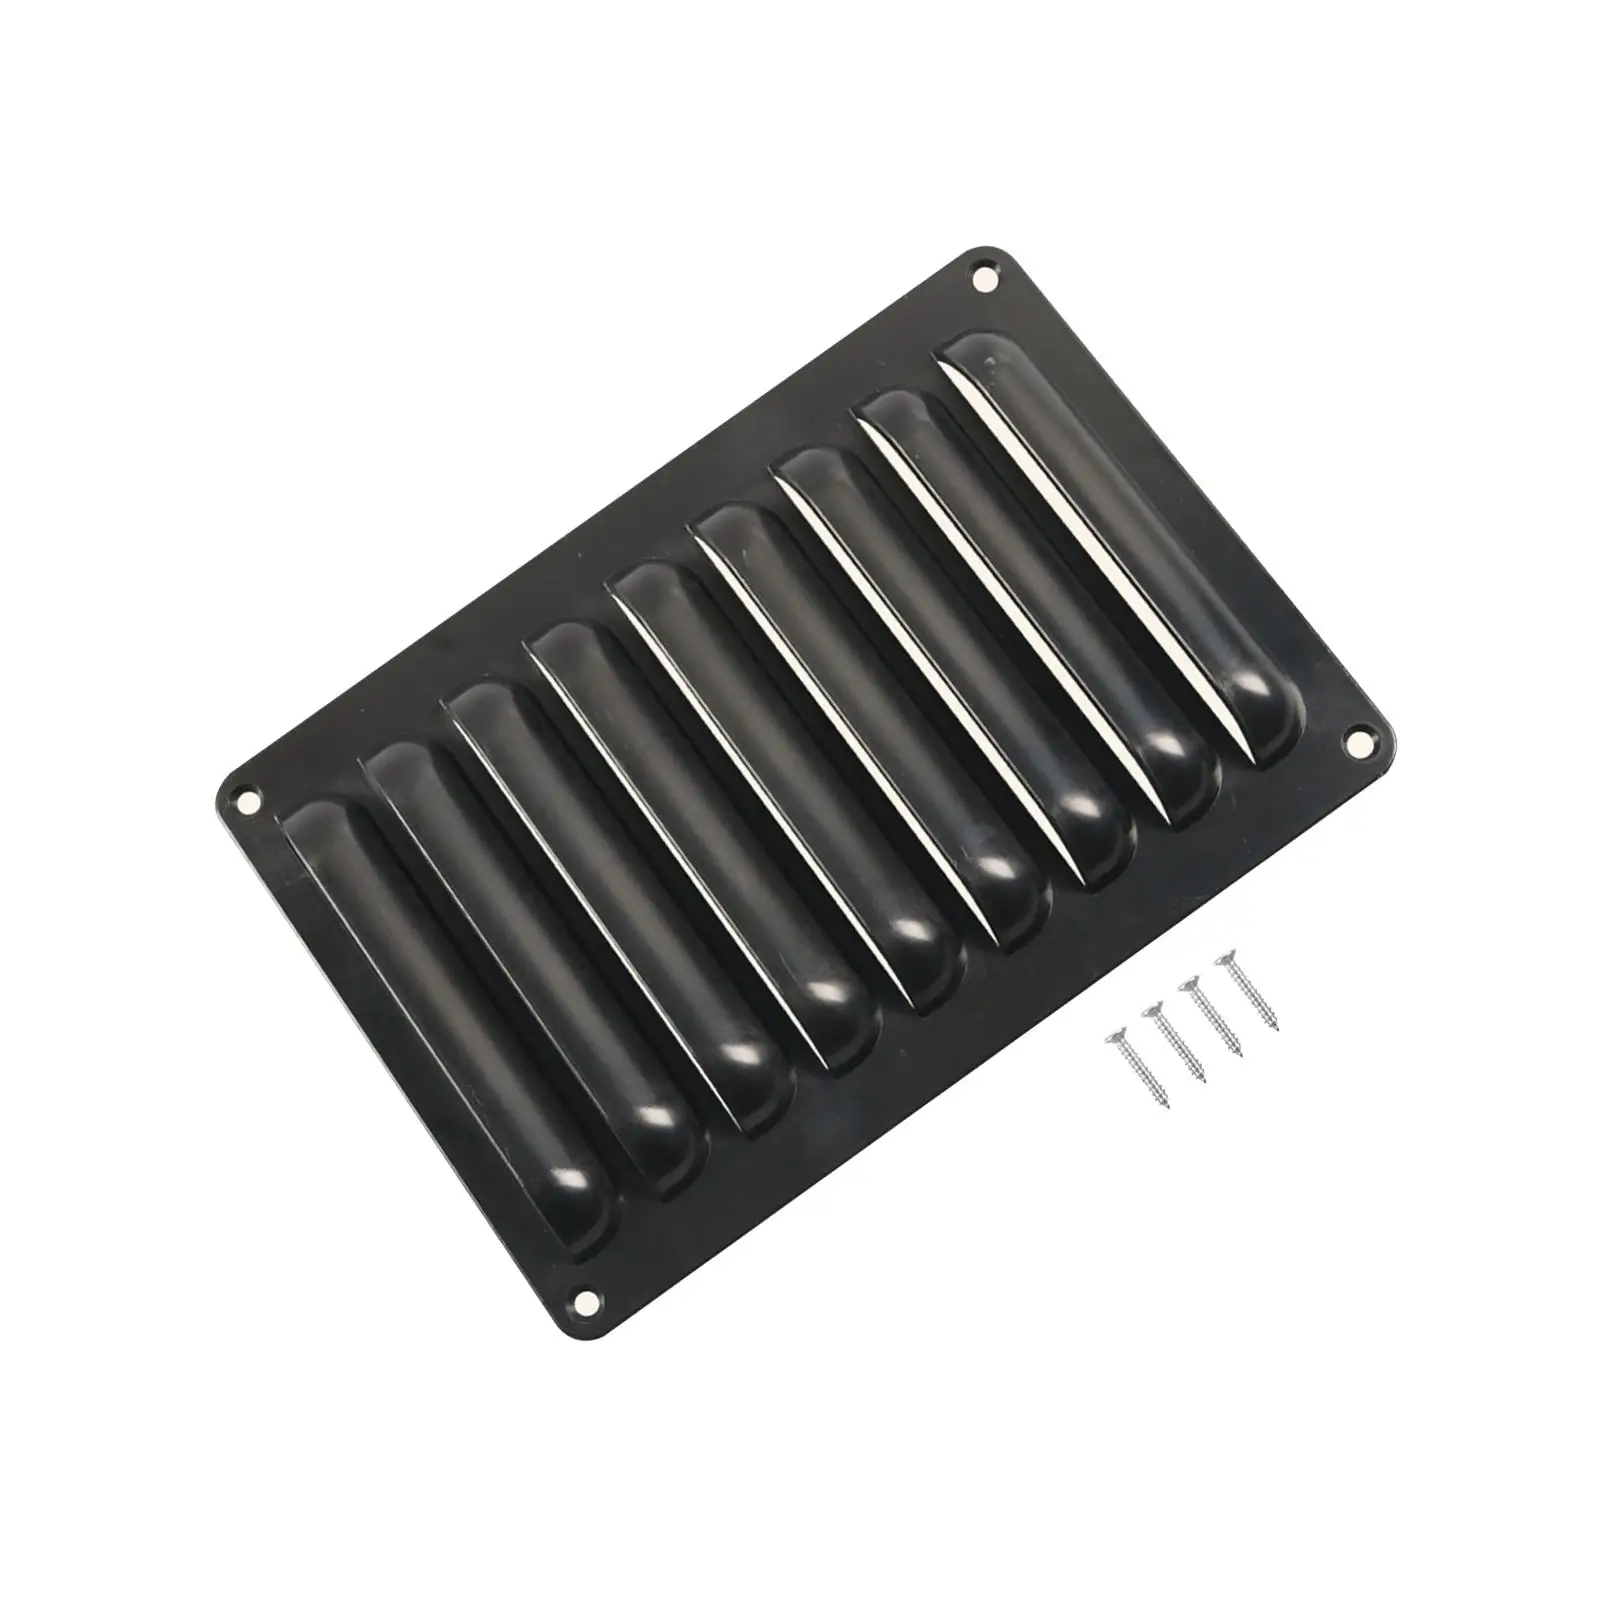 Air Vent Grille Accessories Replacement Part Durable Cover Tool with Screws for Motorhome Traveling Camping